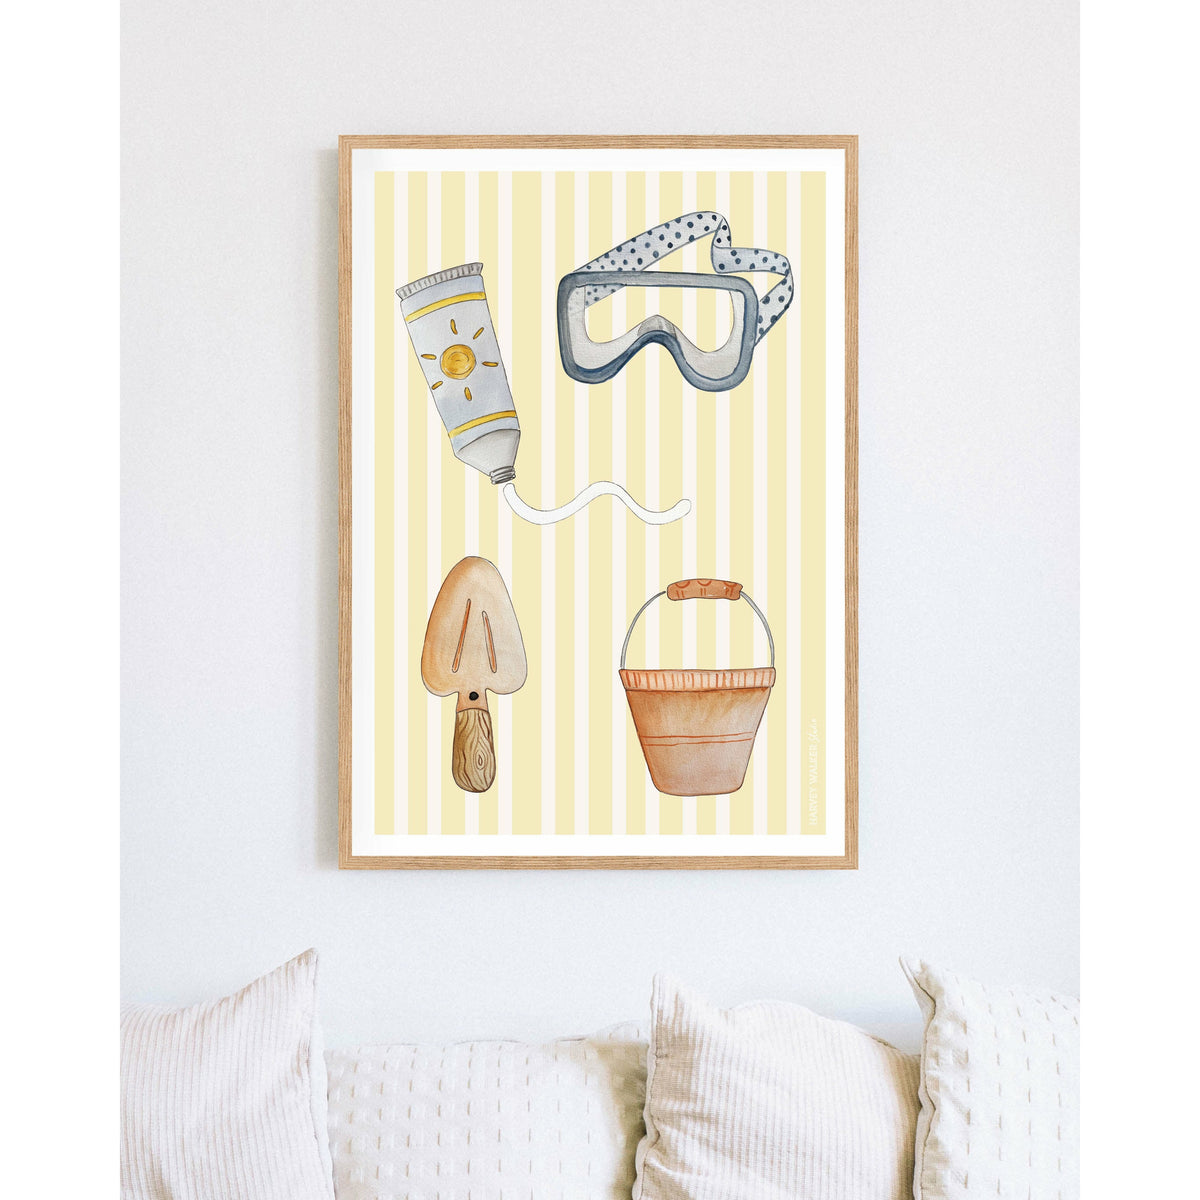 Looking for a beach print that will bring your living room to life? Bring the summer in with this fun beach ready watercolour illustration printed on textured cotton rag and presented in the finest Australian made oak frame